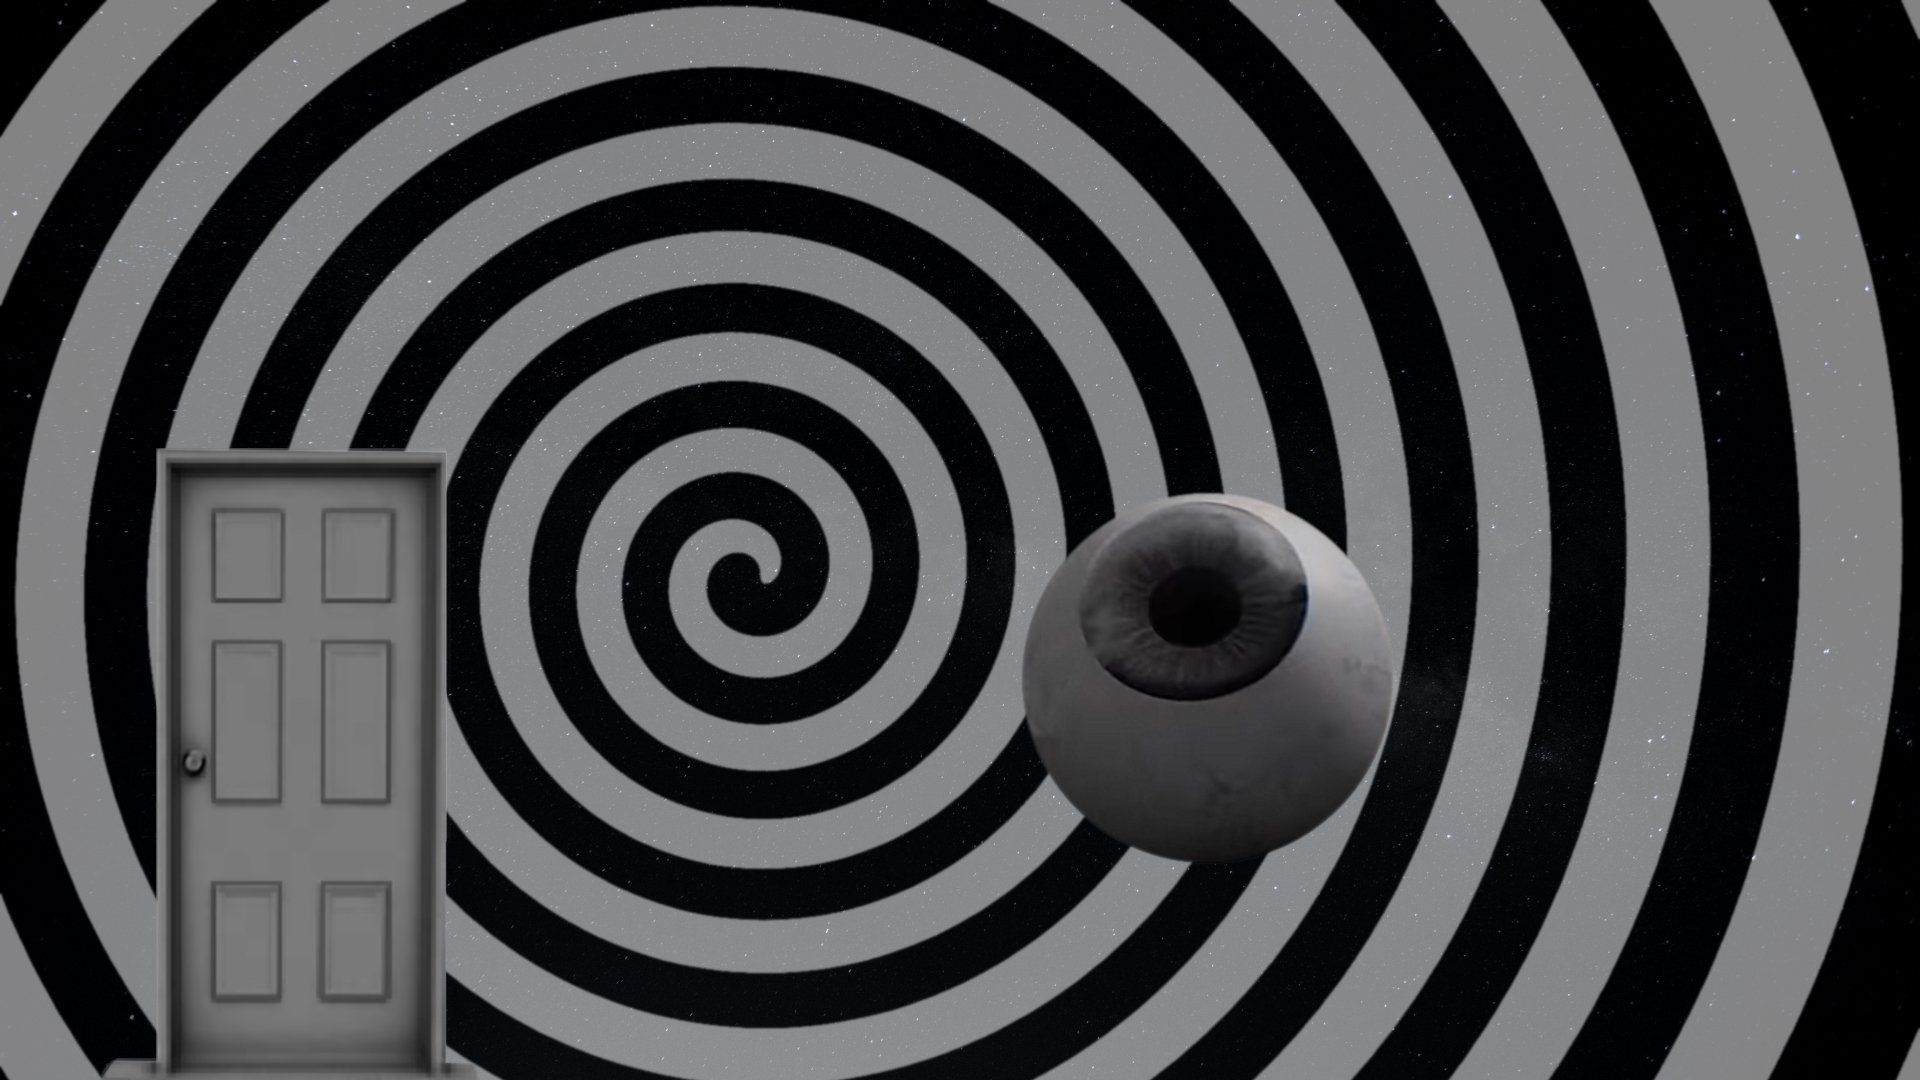 Door and eyeball are sucked into a black and white swirl.